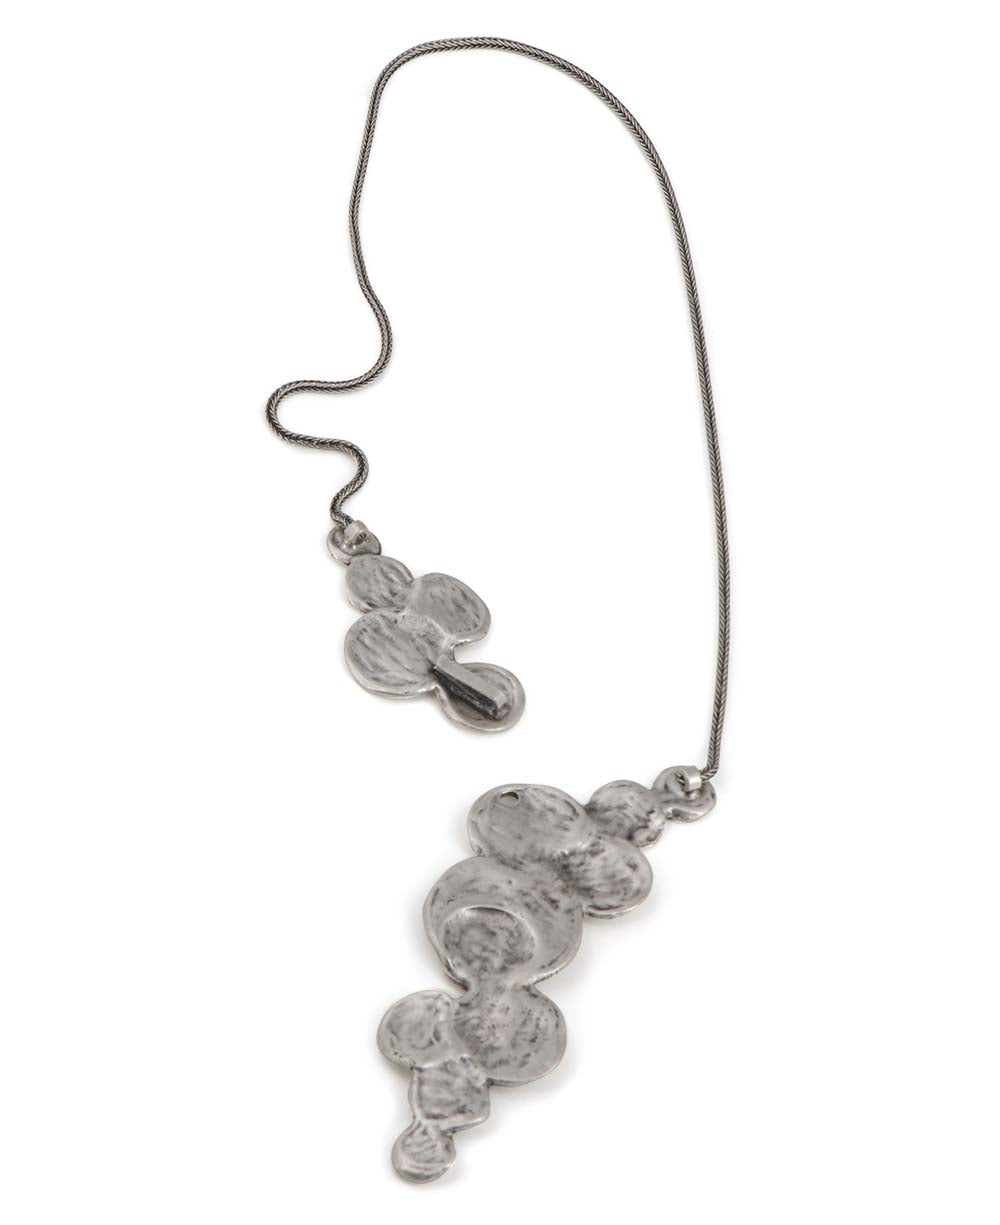 Turkish-Made Pewter Necklace with Structured Discs